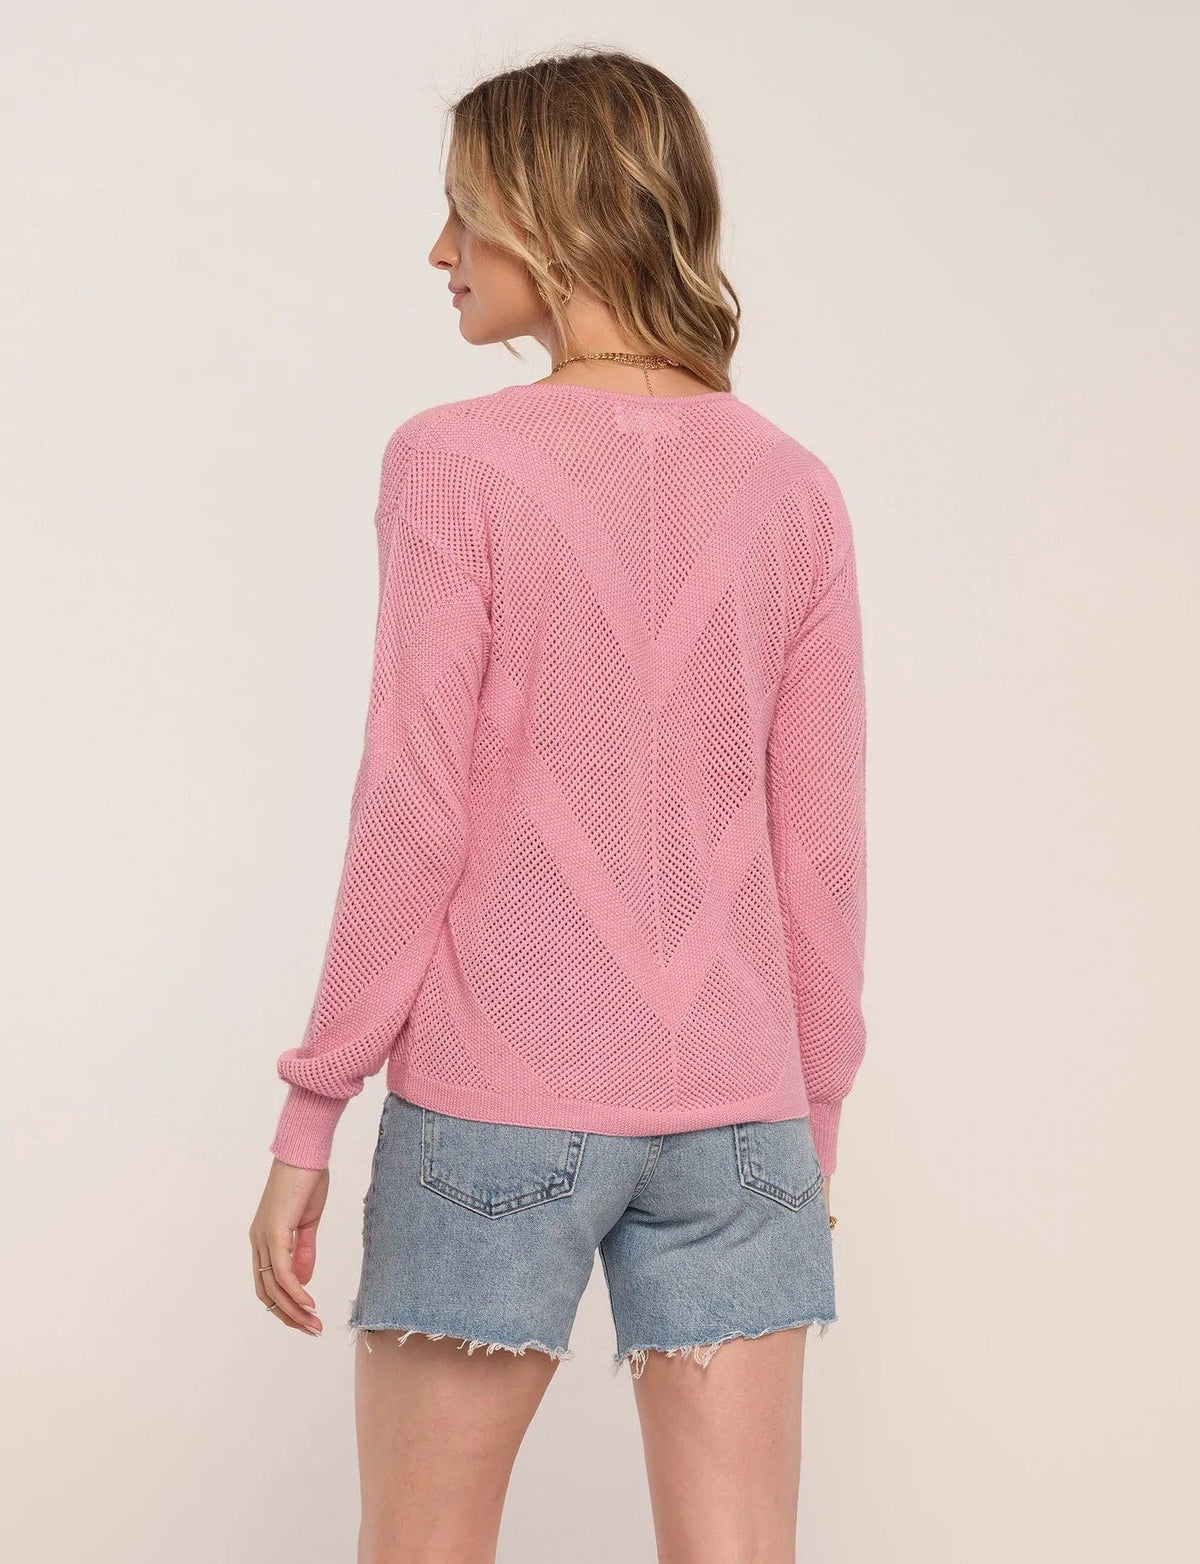 Zen Pointelle Knit Sweater in Lily by Heartloom - Sweater - Blooming Daily